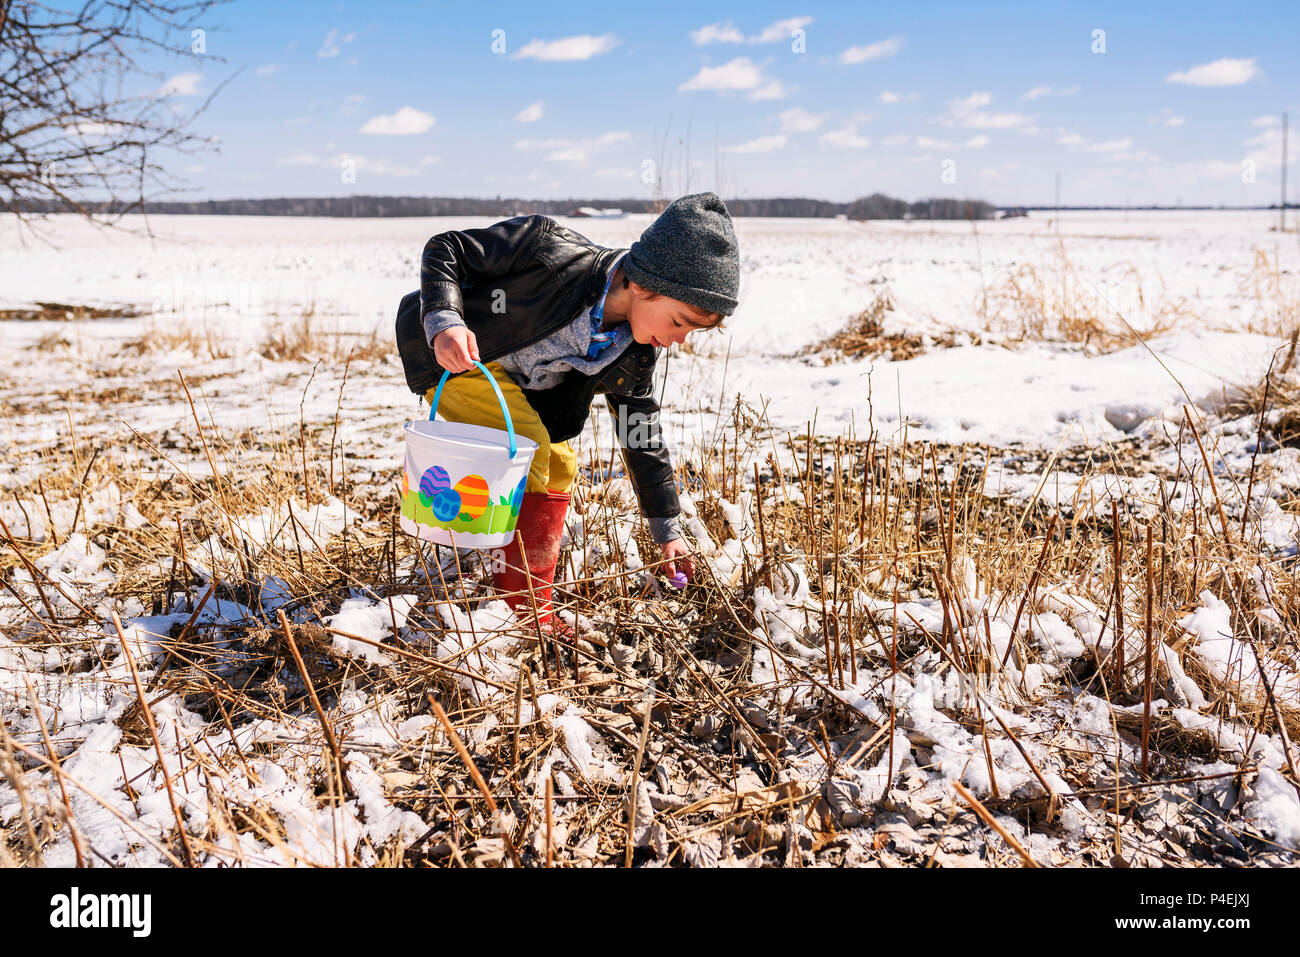 Boy on an Easter egg hunt in the snow Stock Photo